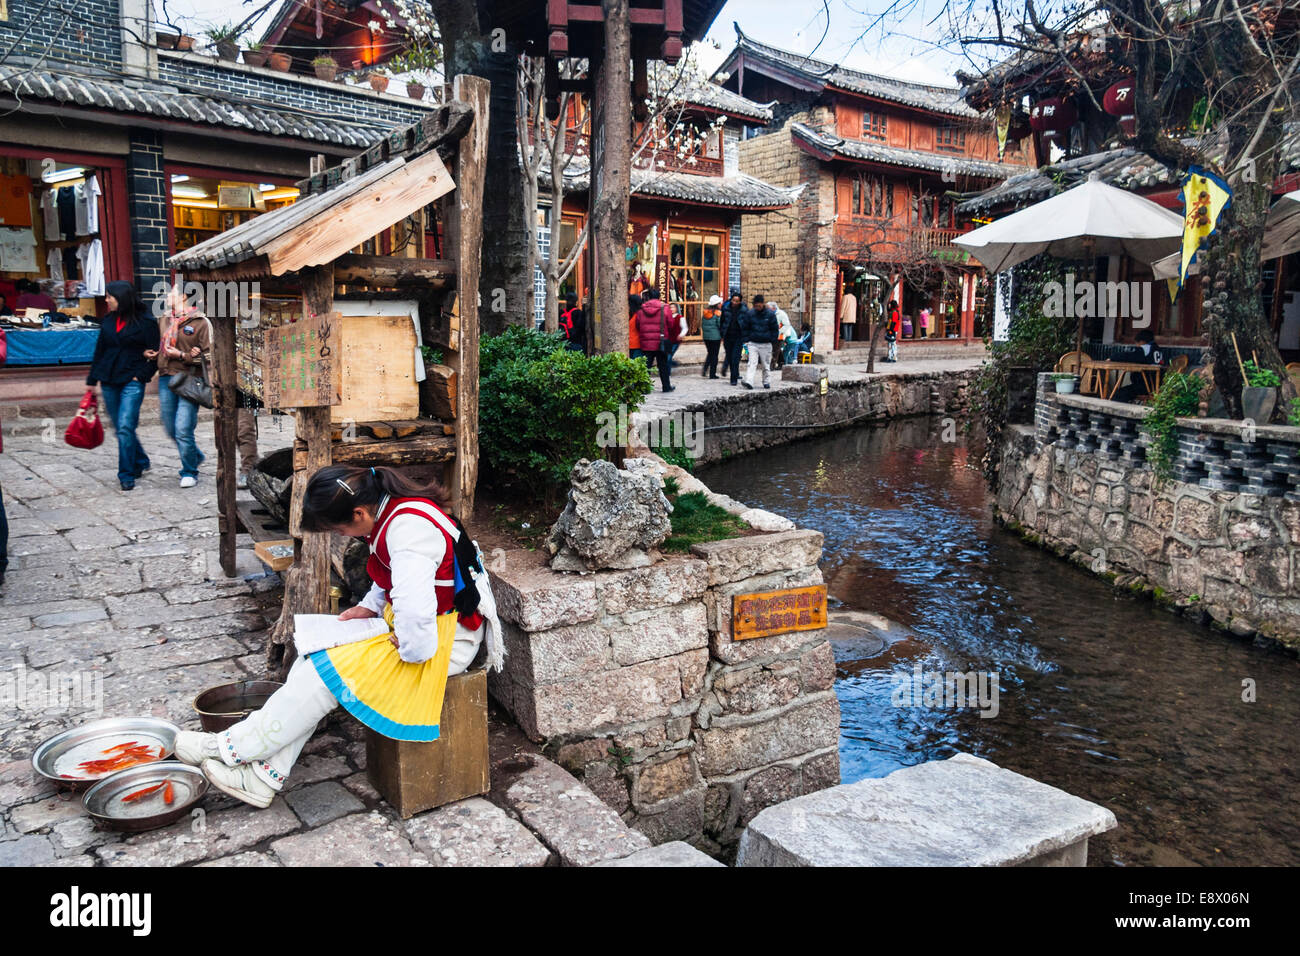 Naxi woman selling red carp by a waterway in old town Lijiang, Yunnan, China Stock Photo